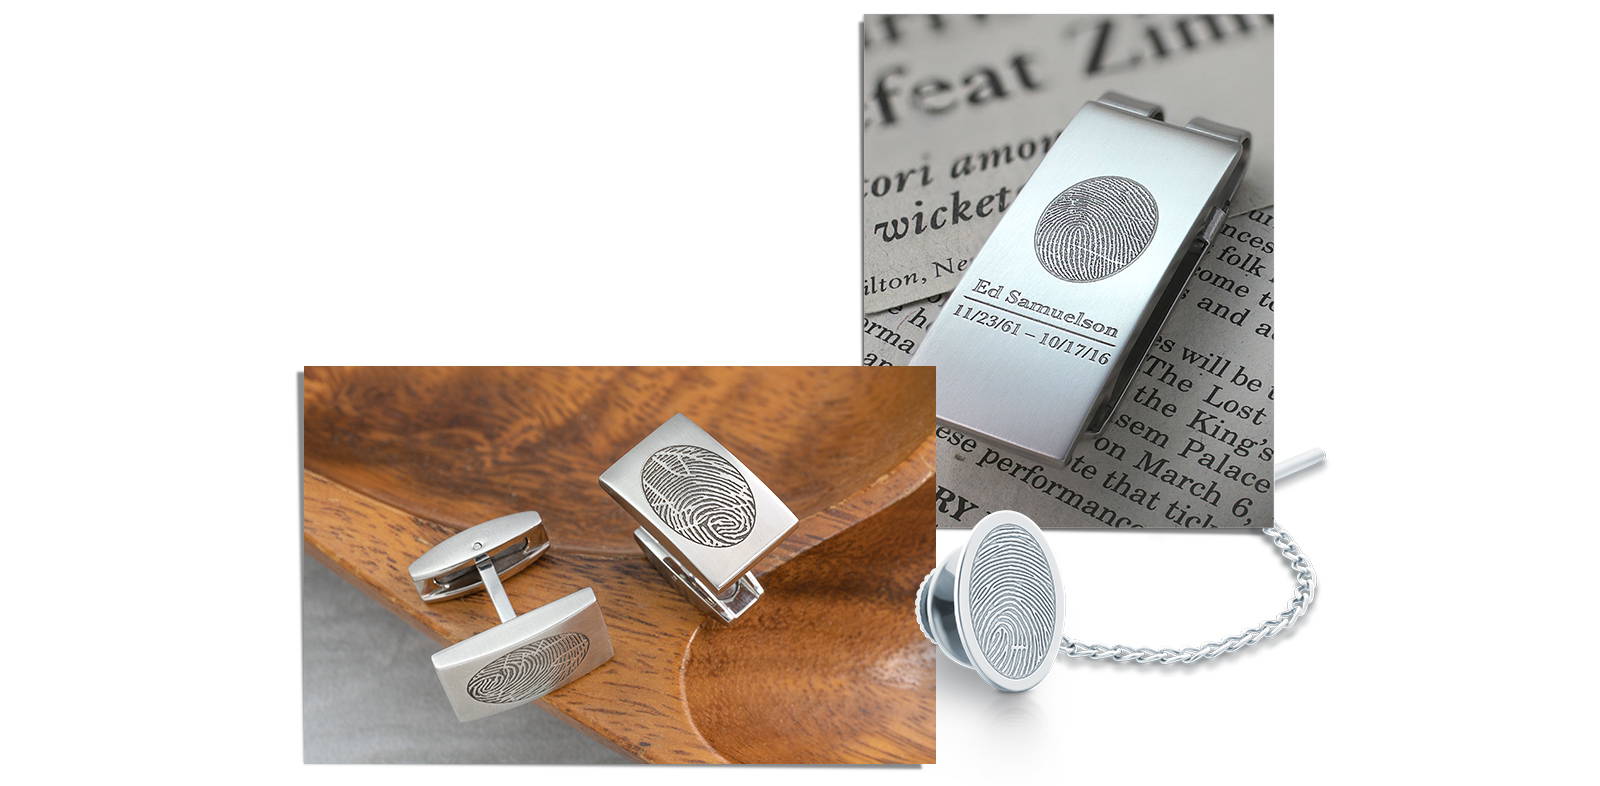 money clip engraved with a fingerprint, name, and dates of birth and death, cufflinks and tie tack engraved with fingerprint